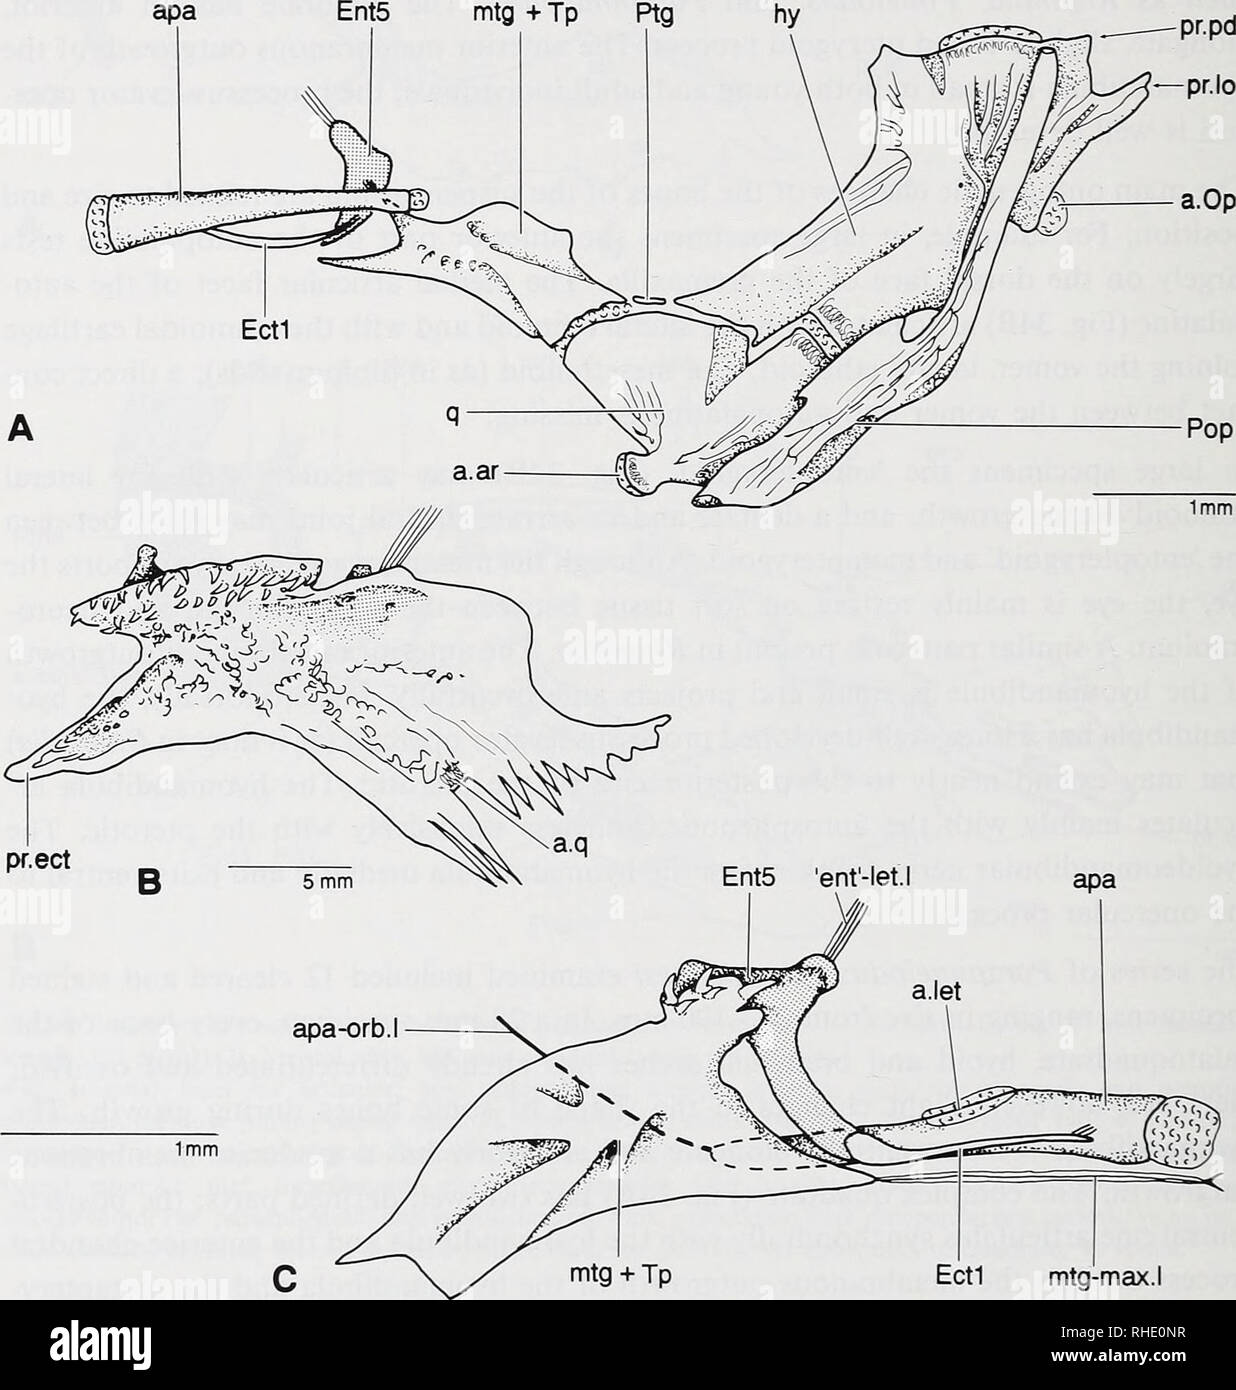 . Bonner zoologische Monographien. Zoology. 64 In some young and adult specimens, a small, elongate additional pterygoid type 1 (Fig. 35A) is present between the ventral part of the anterior membranous outgrowth of the hyomandibula and the dermo + metapterygoid; in other specimens, the pterygoid type 1 fuses to the dermo + metapterygoid. This additional pterygoid is apparently not a fracture of the dermo + metapterygoid.. Fig.35: Suspensorium of Parapimelodus valenciennesi. — A: Suspensorium and preopercle, lateral view (41.6 mm standard length; ZMH 6669); B: Dermo + metapterygoid, medial view Stock Photo